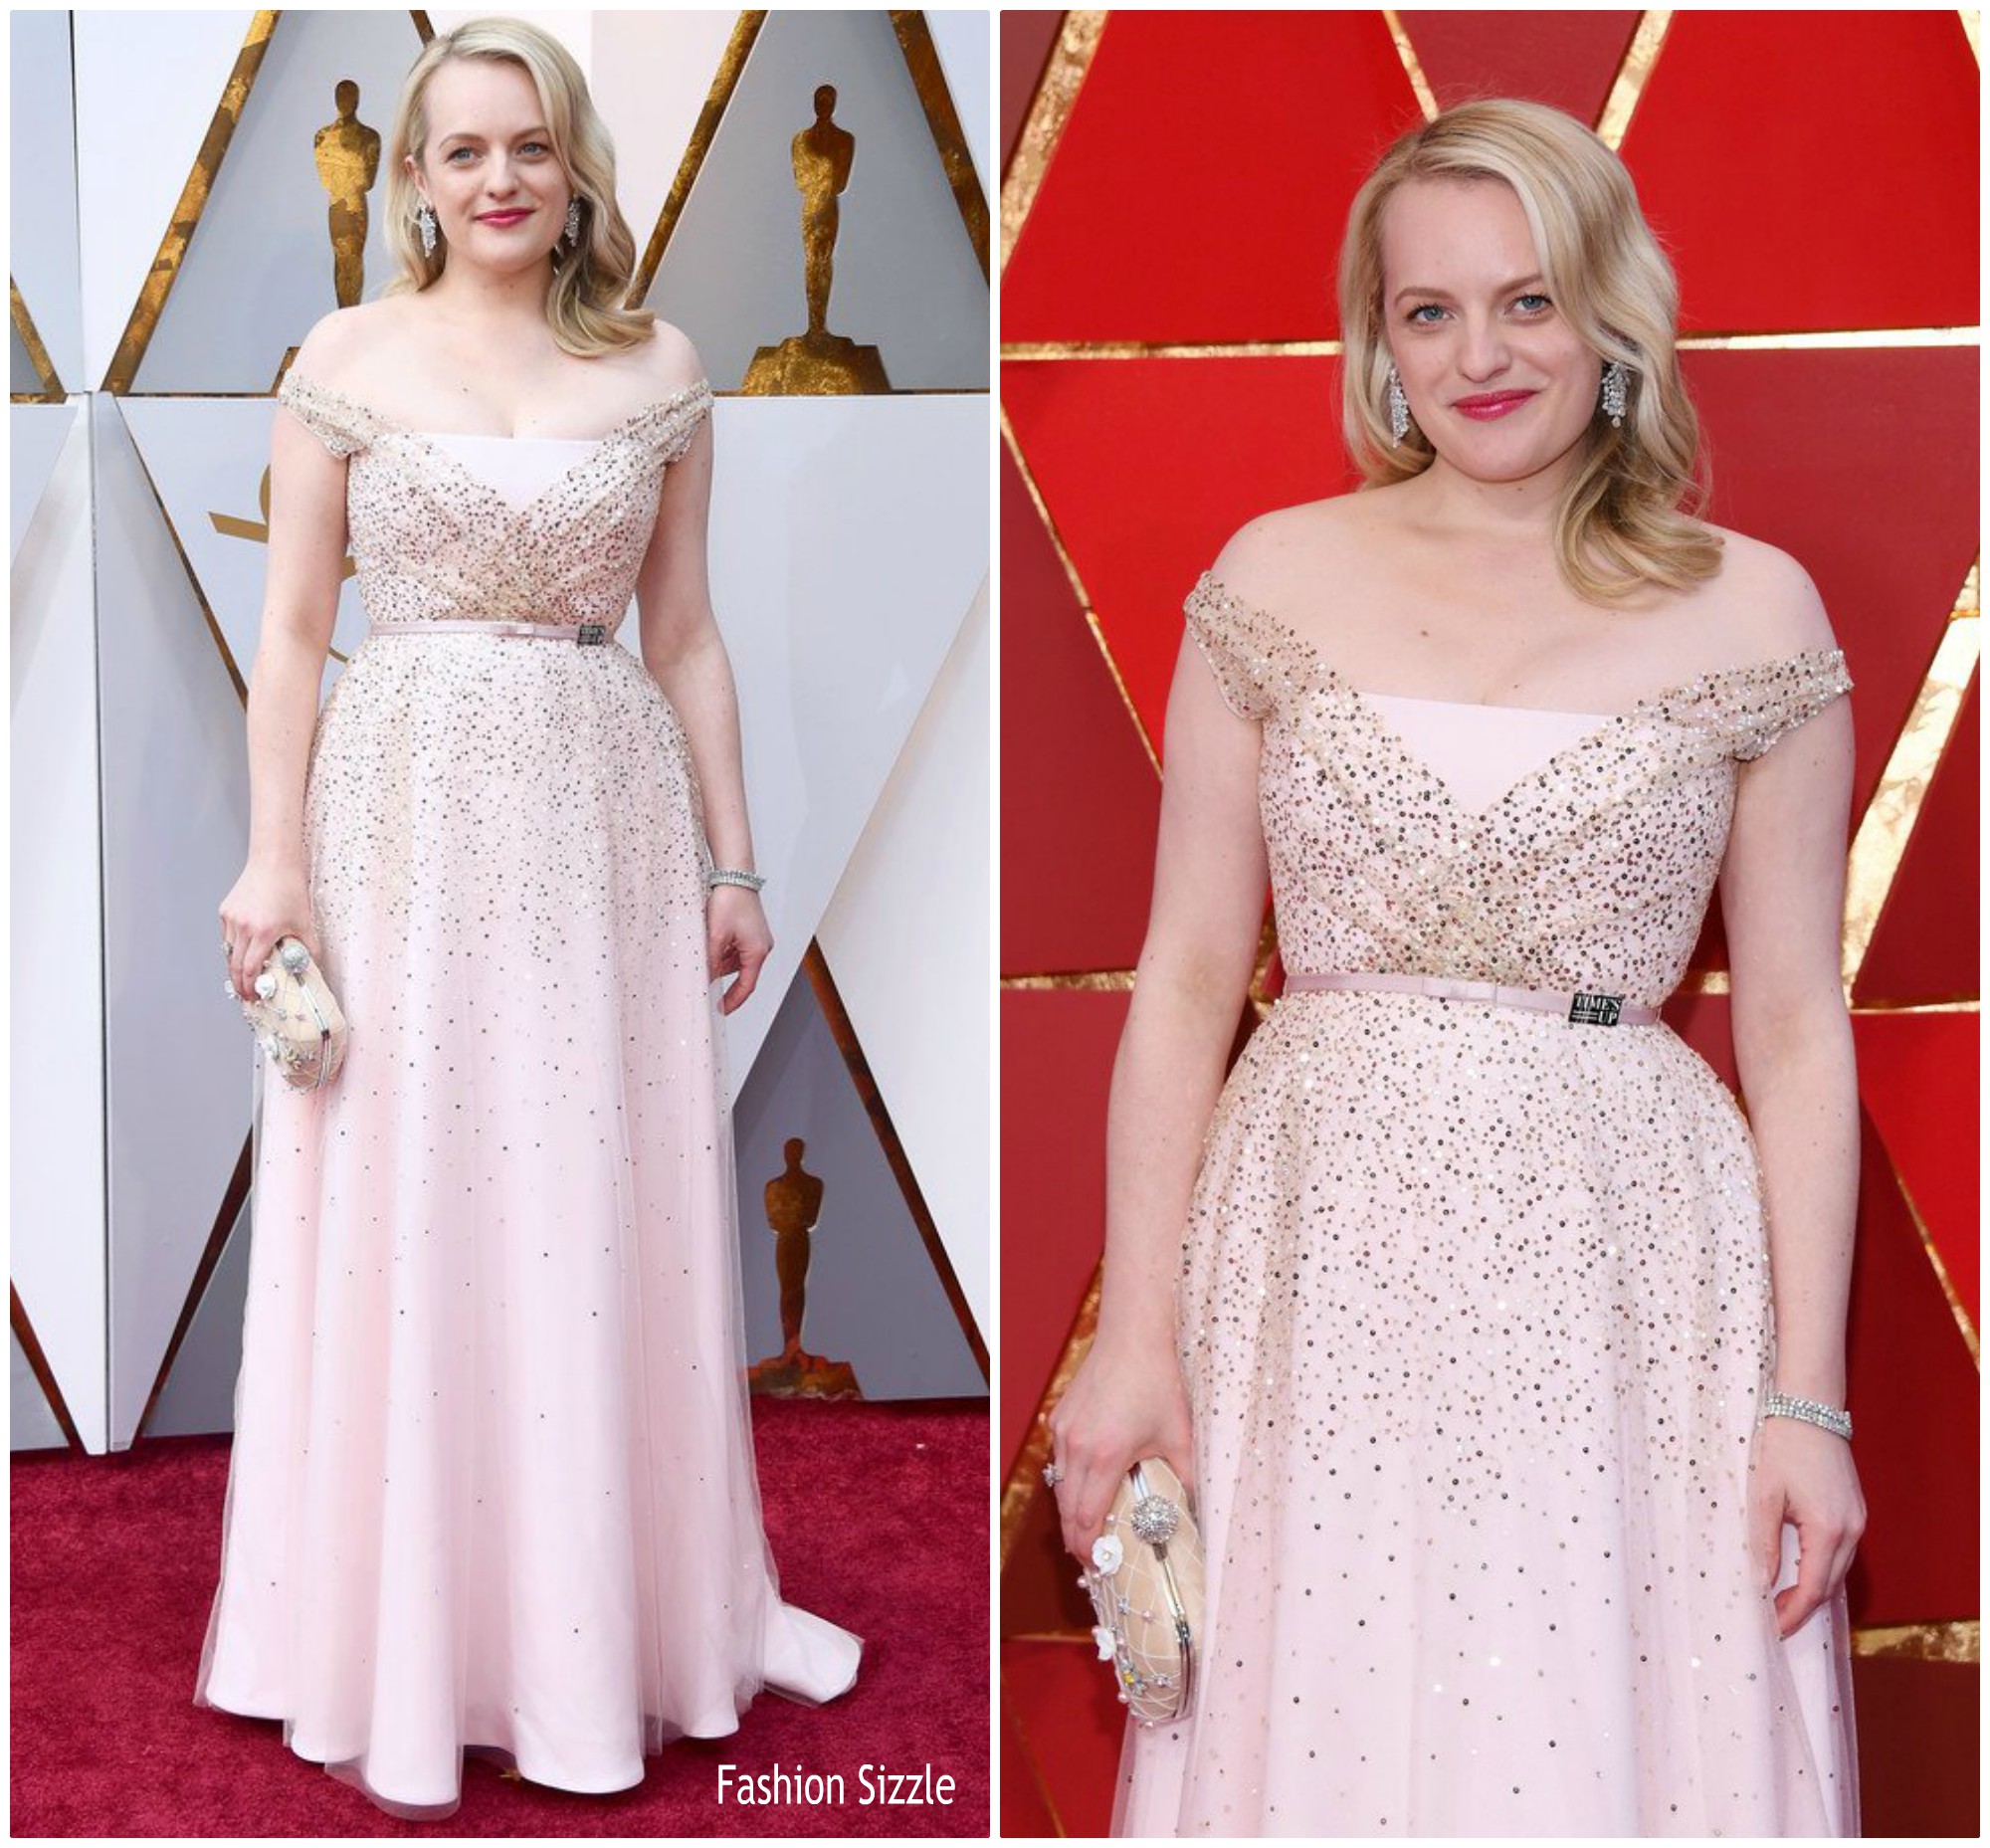 elisabeth-moss-in-christian-dior-couture-2018-oscars